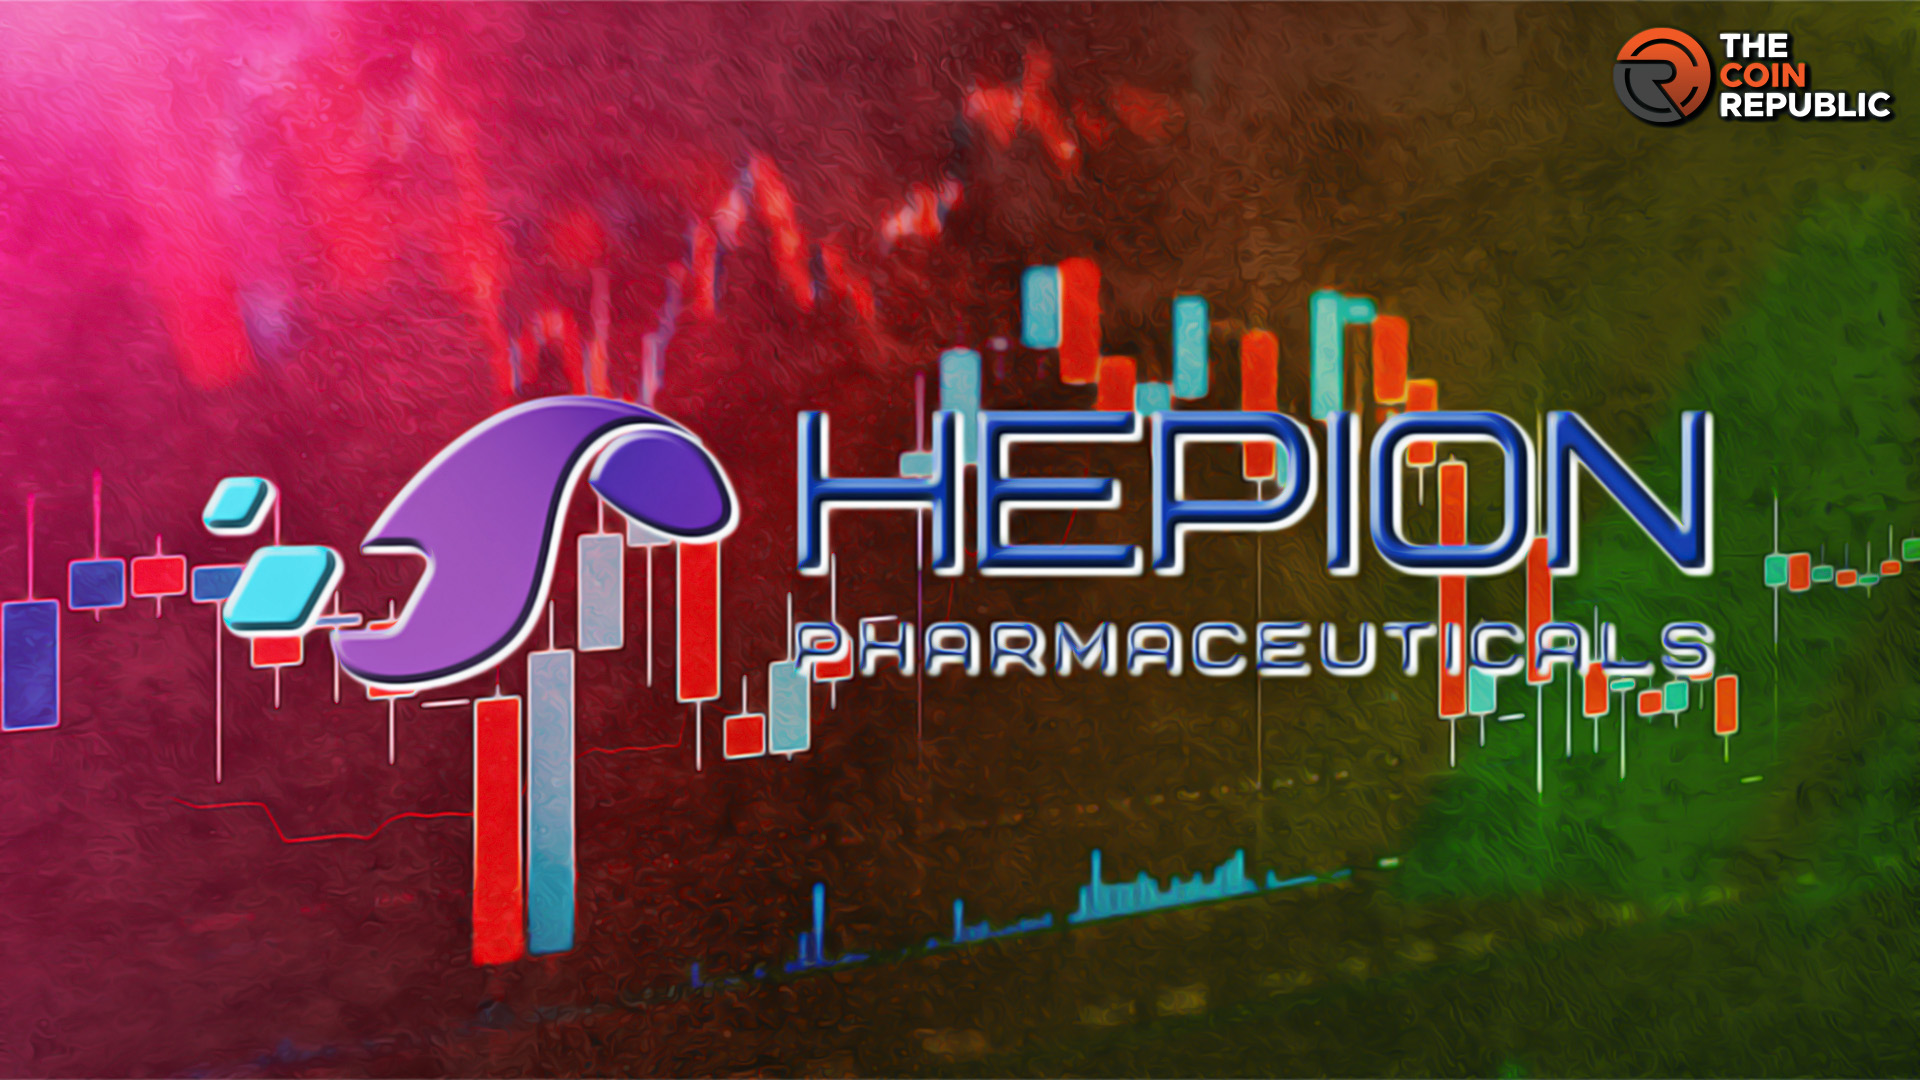 Could Hepion Pharmaceuticals Count Among the Best Investments?